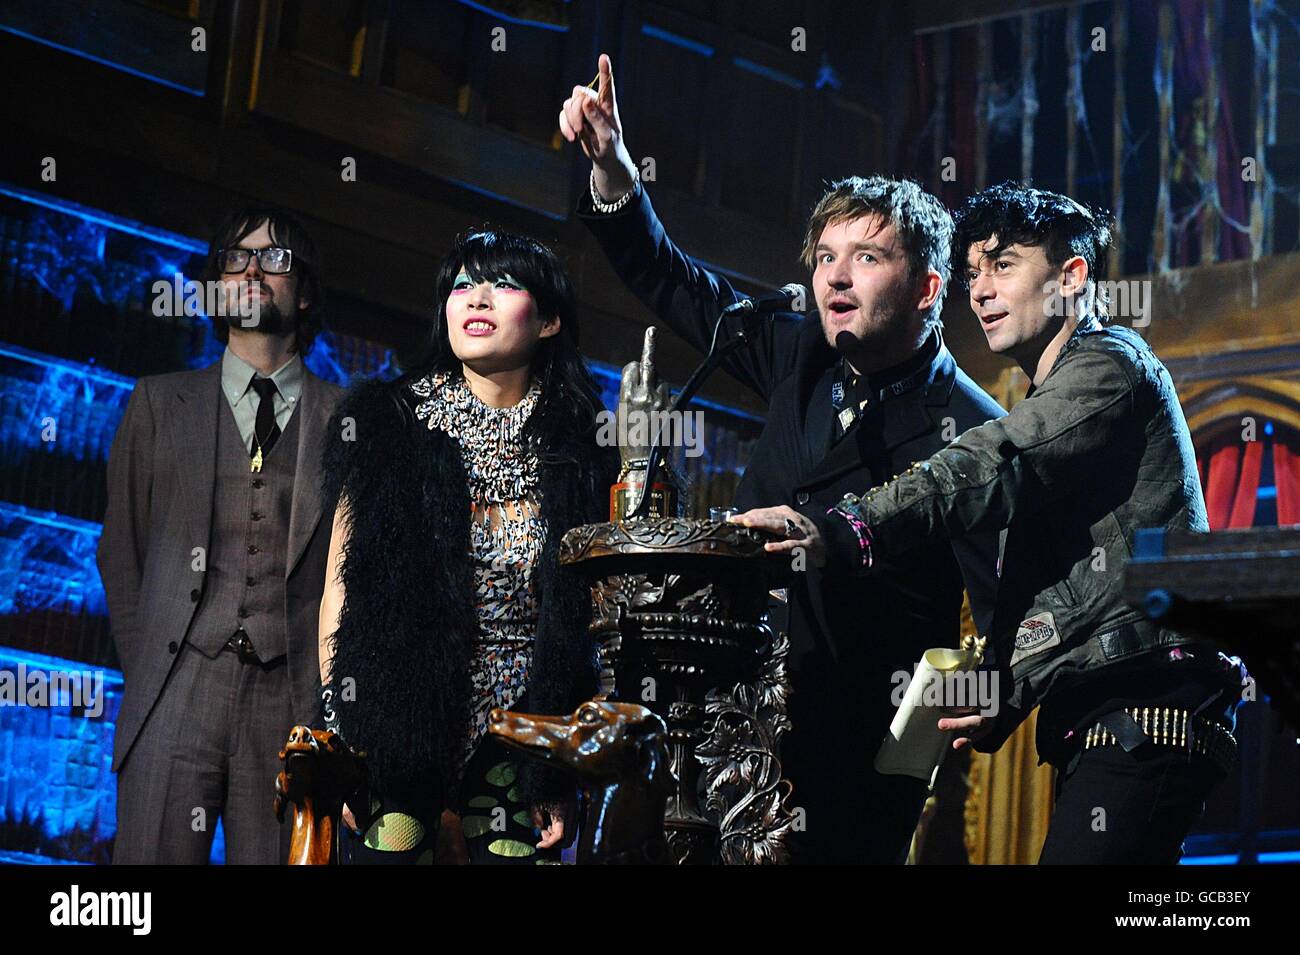 (left to right) Jarvis Cocker, Akiko Matsuura, Milo Cordell and Robbie Furze on stage during the 2010 NME Awards at the O2 Academy Brixton, London Stock Photo